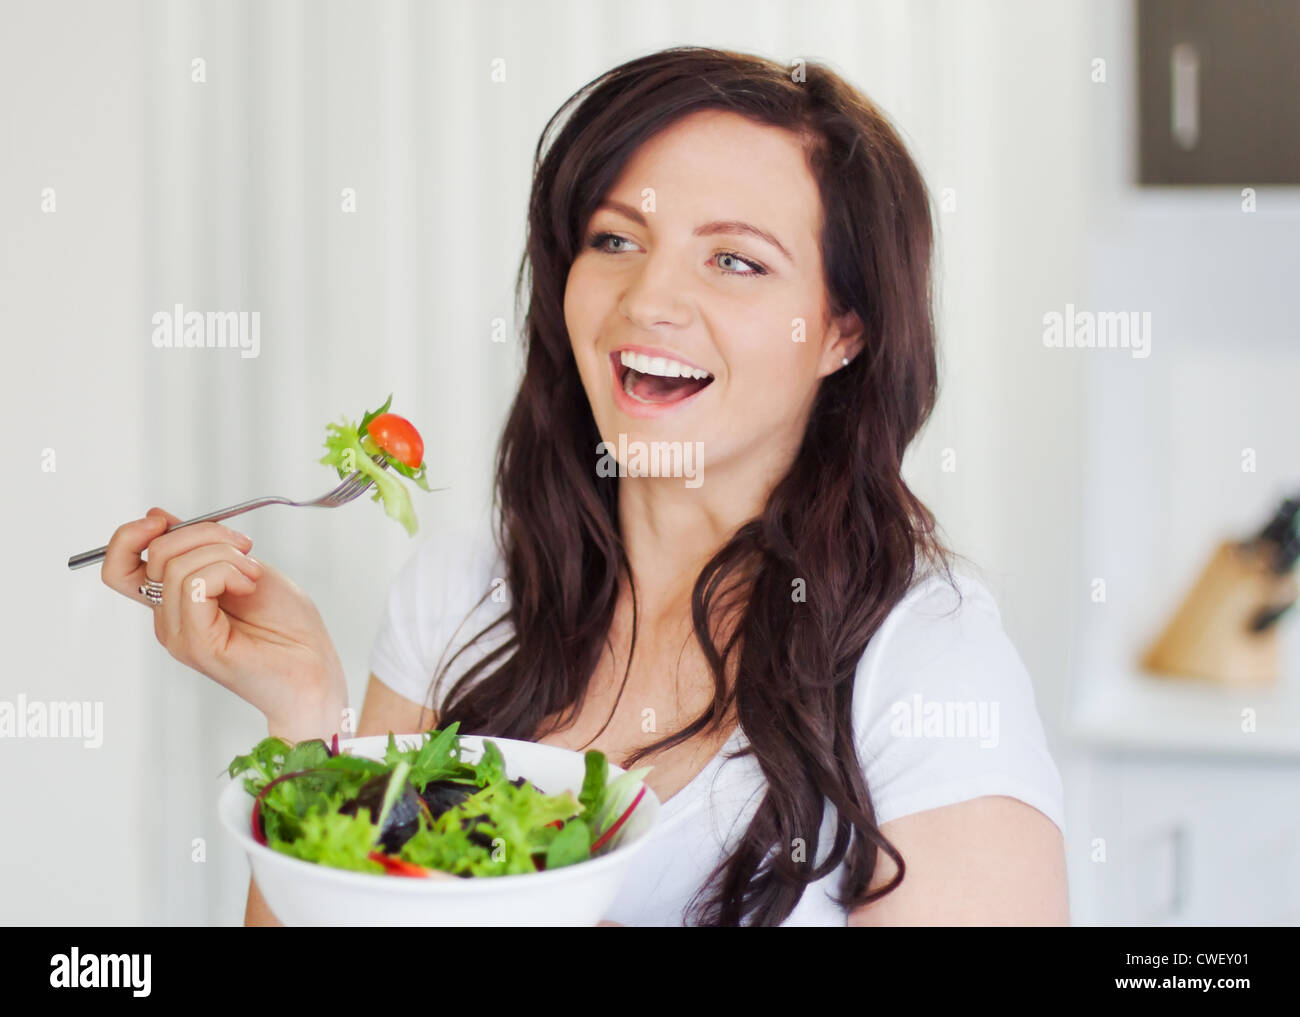 Attractive young woman eating a healthy salad Stock Photo